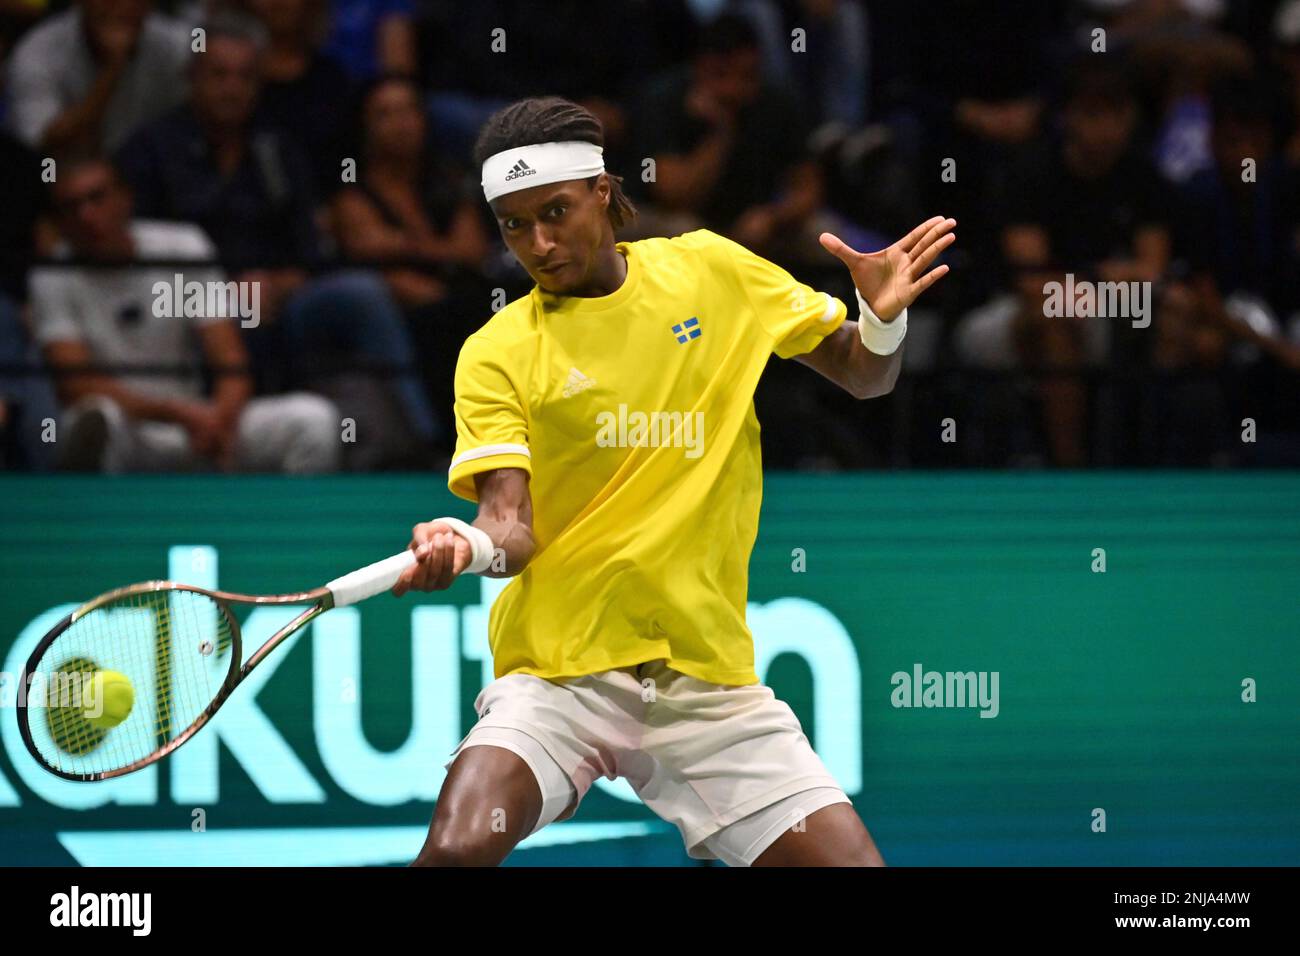 Swedens Mikael Ymer returns a ball to Italys Janni Sinner during their Davis Cup tennis match at the Unipol Arena in Bologna, Italy, Sunday, Sept